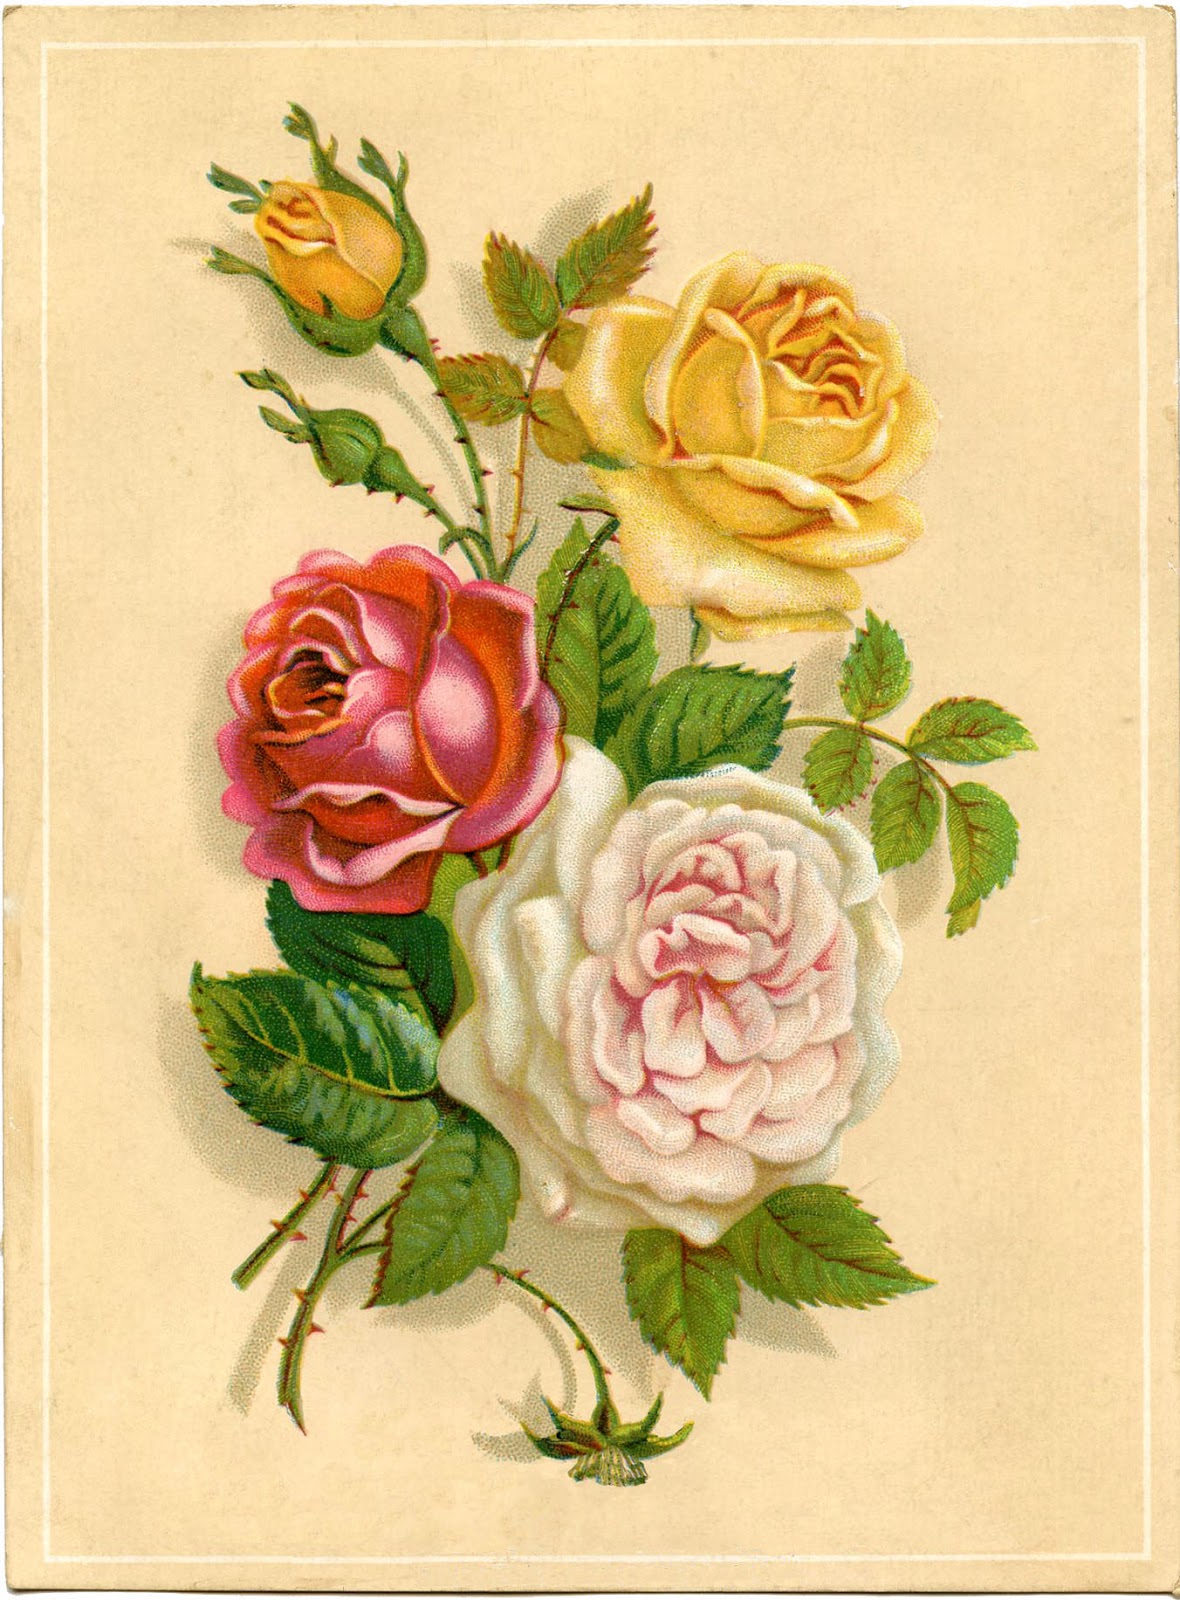 Vintage Stock Images - Old Roses & a GIVEAWAY! - The Graphics Fairy